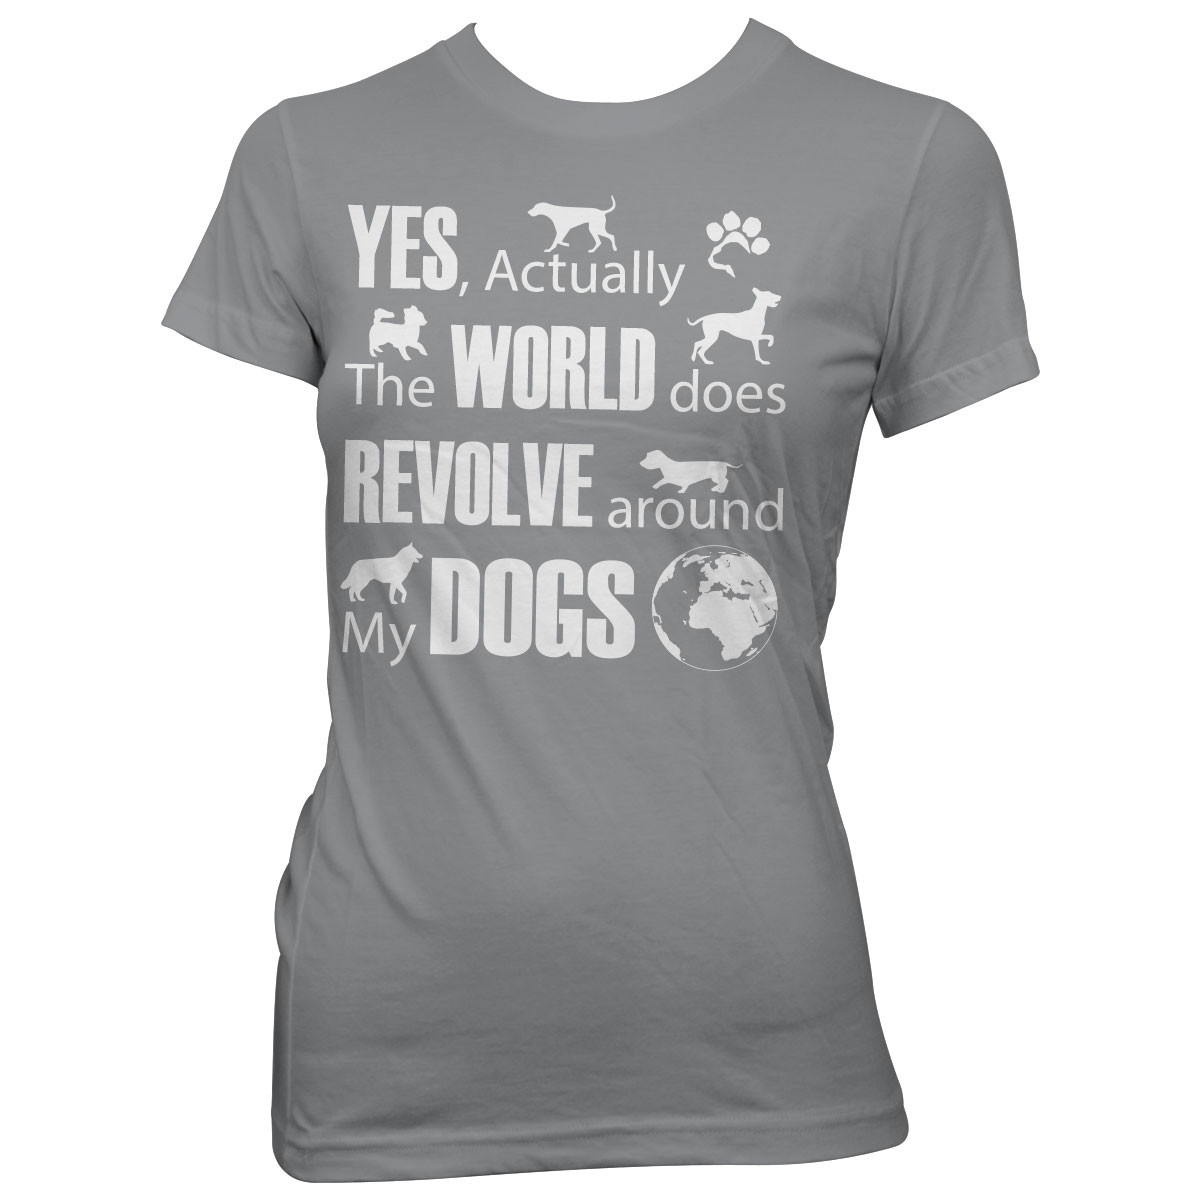 "The World Does Revolve Around My Dogs" T-Shirt